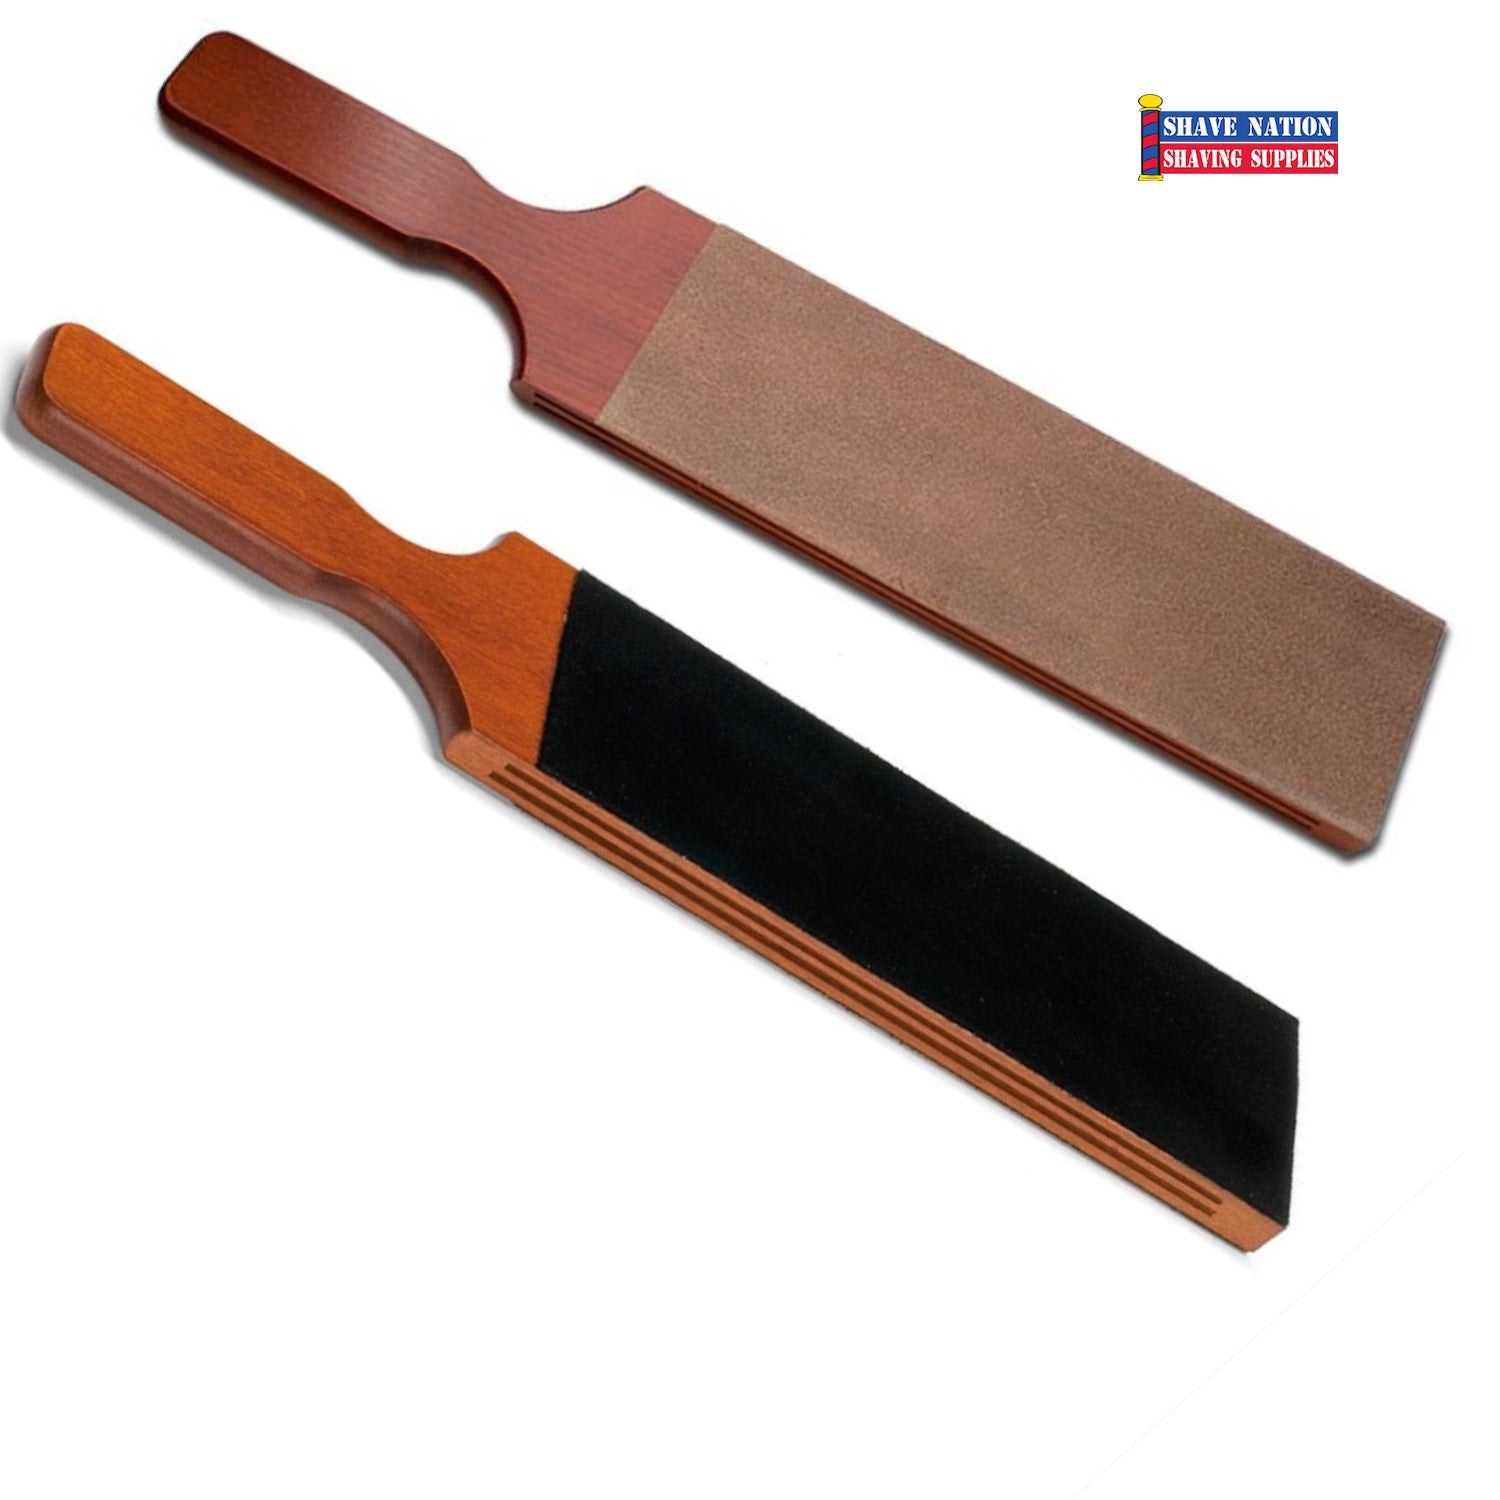 https://shavenation.com/cdn/shop/files/thiers-issard-couble-sided-strop-ribbed-cuts-shave-nation.jpg?v=1682790461